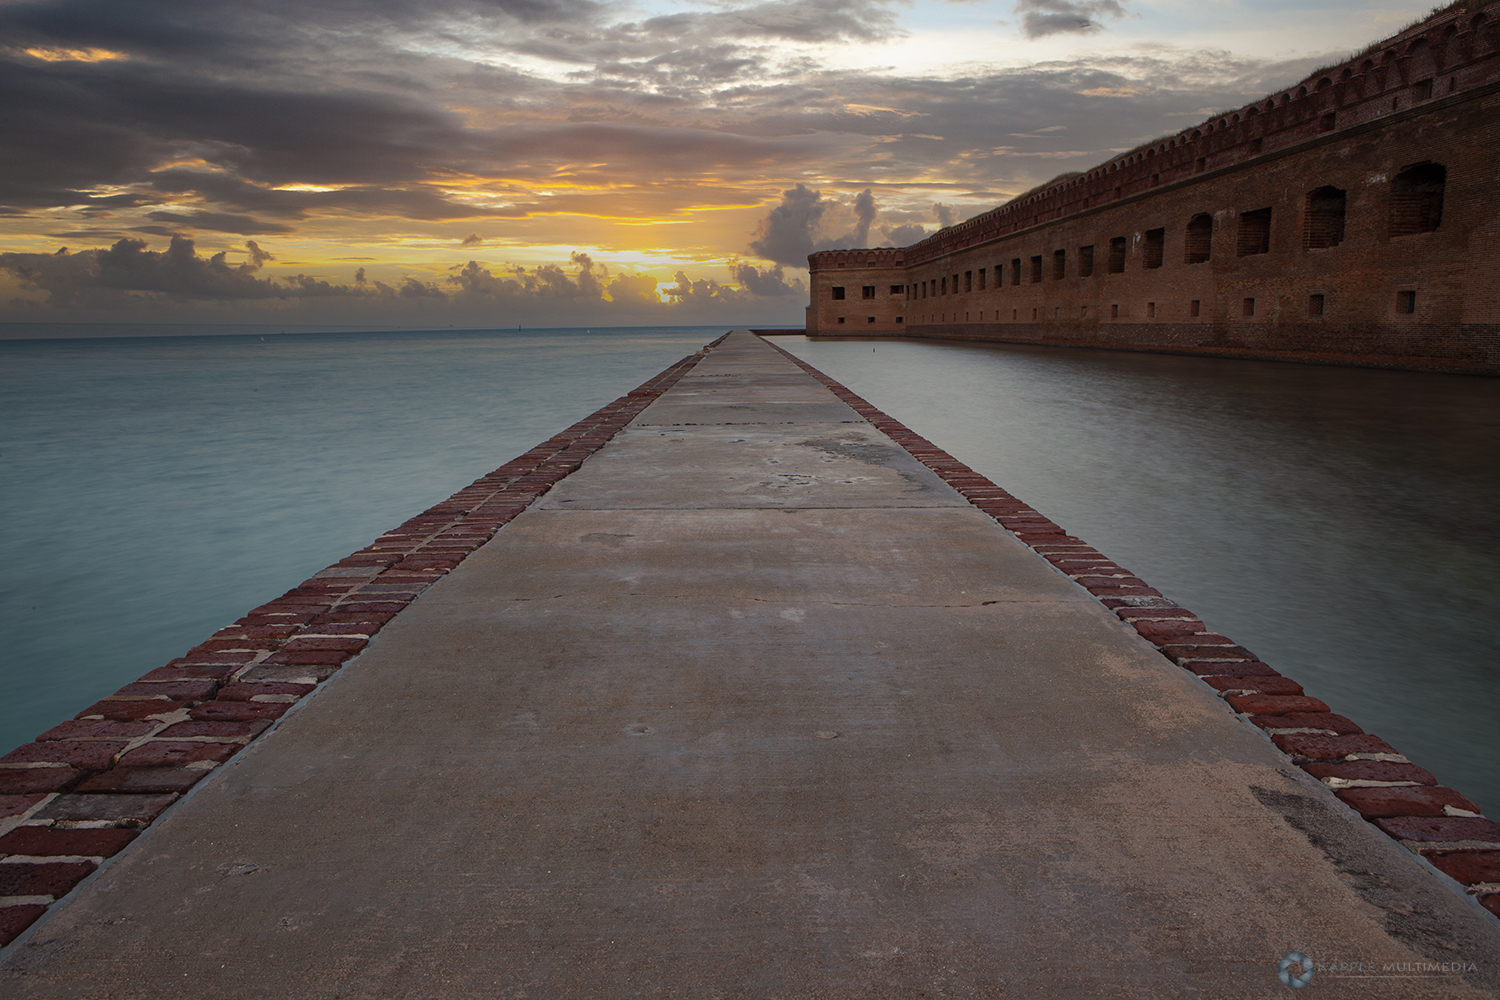 Ft Jefferson, Dry Tortugas National Park